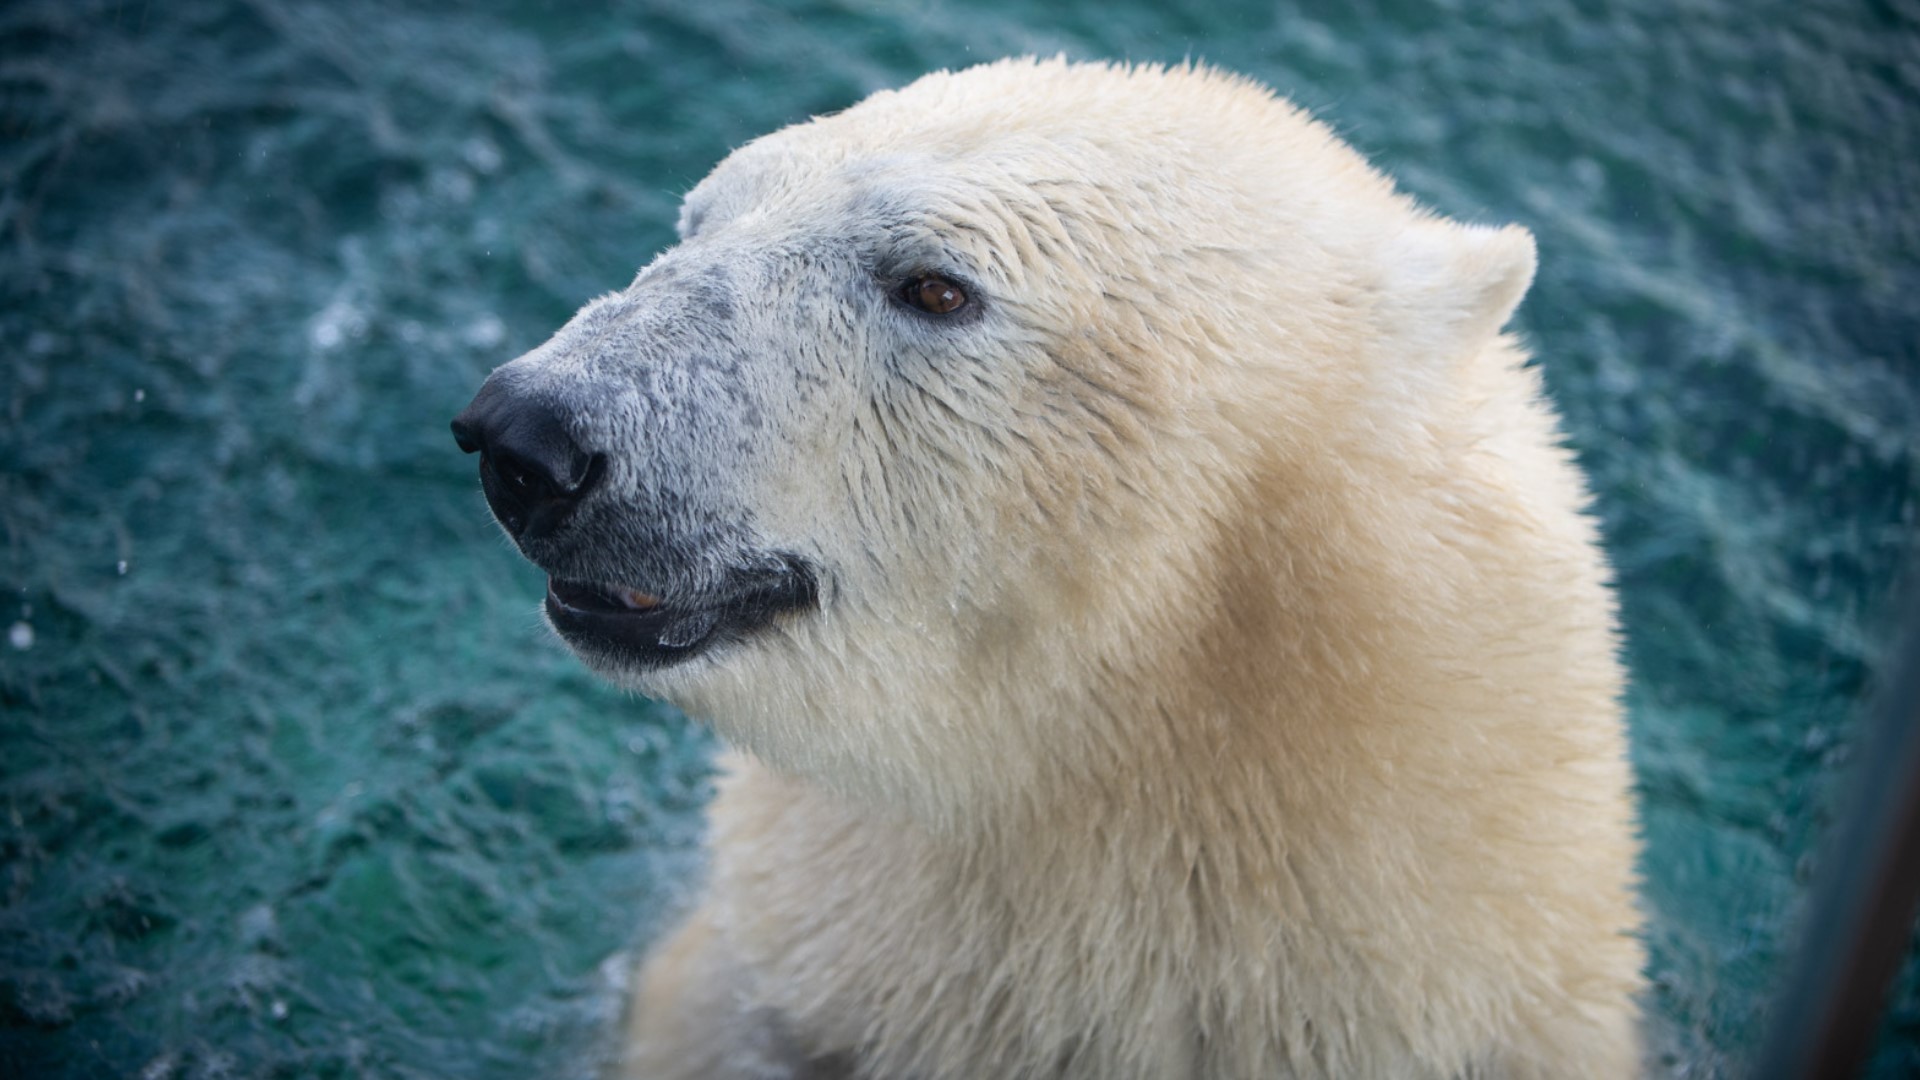 The Columbus Zoo said the 15-year-old polar bear started showing unusual behavior in early September.